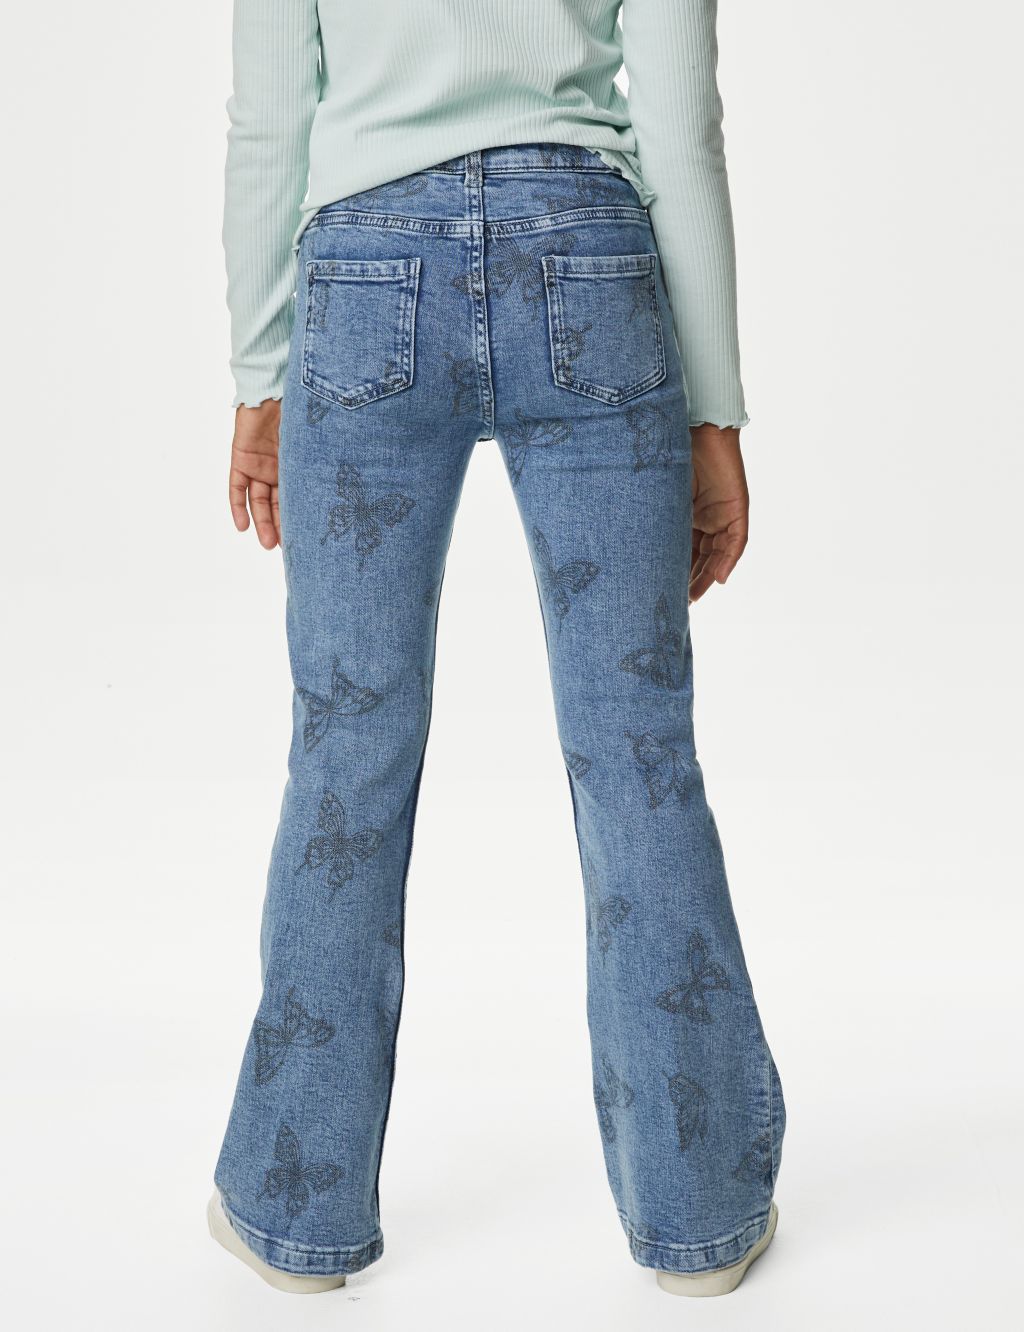 Denim Flared Butterfly Jeans (6-16 Yrs) image 5